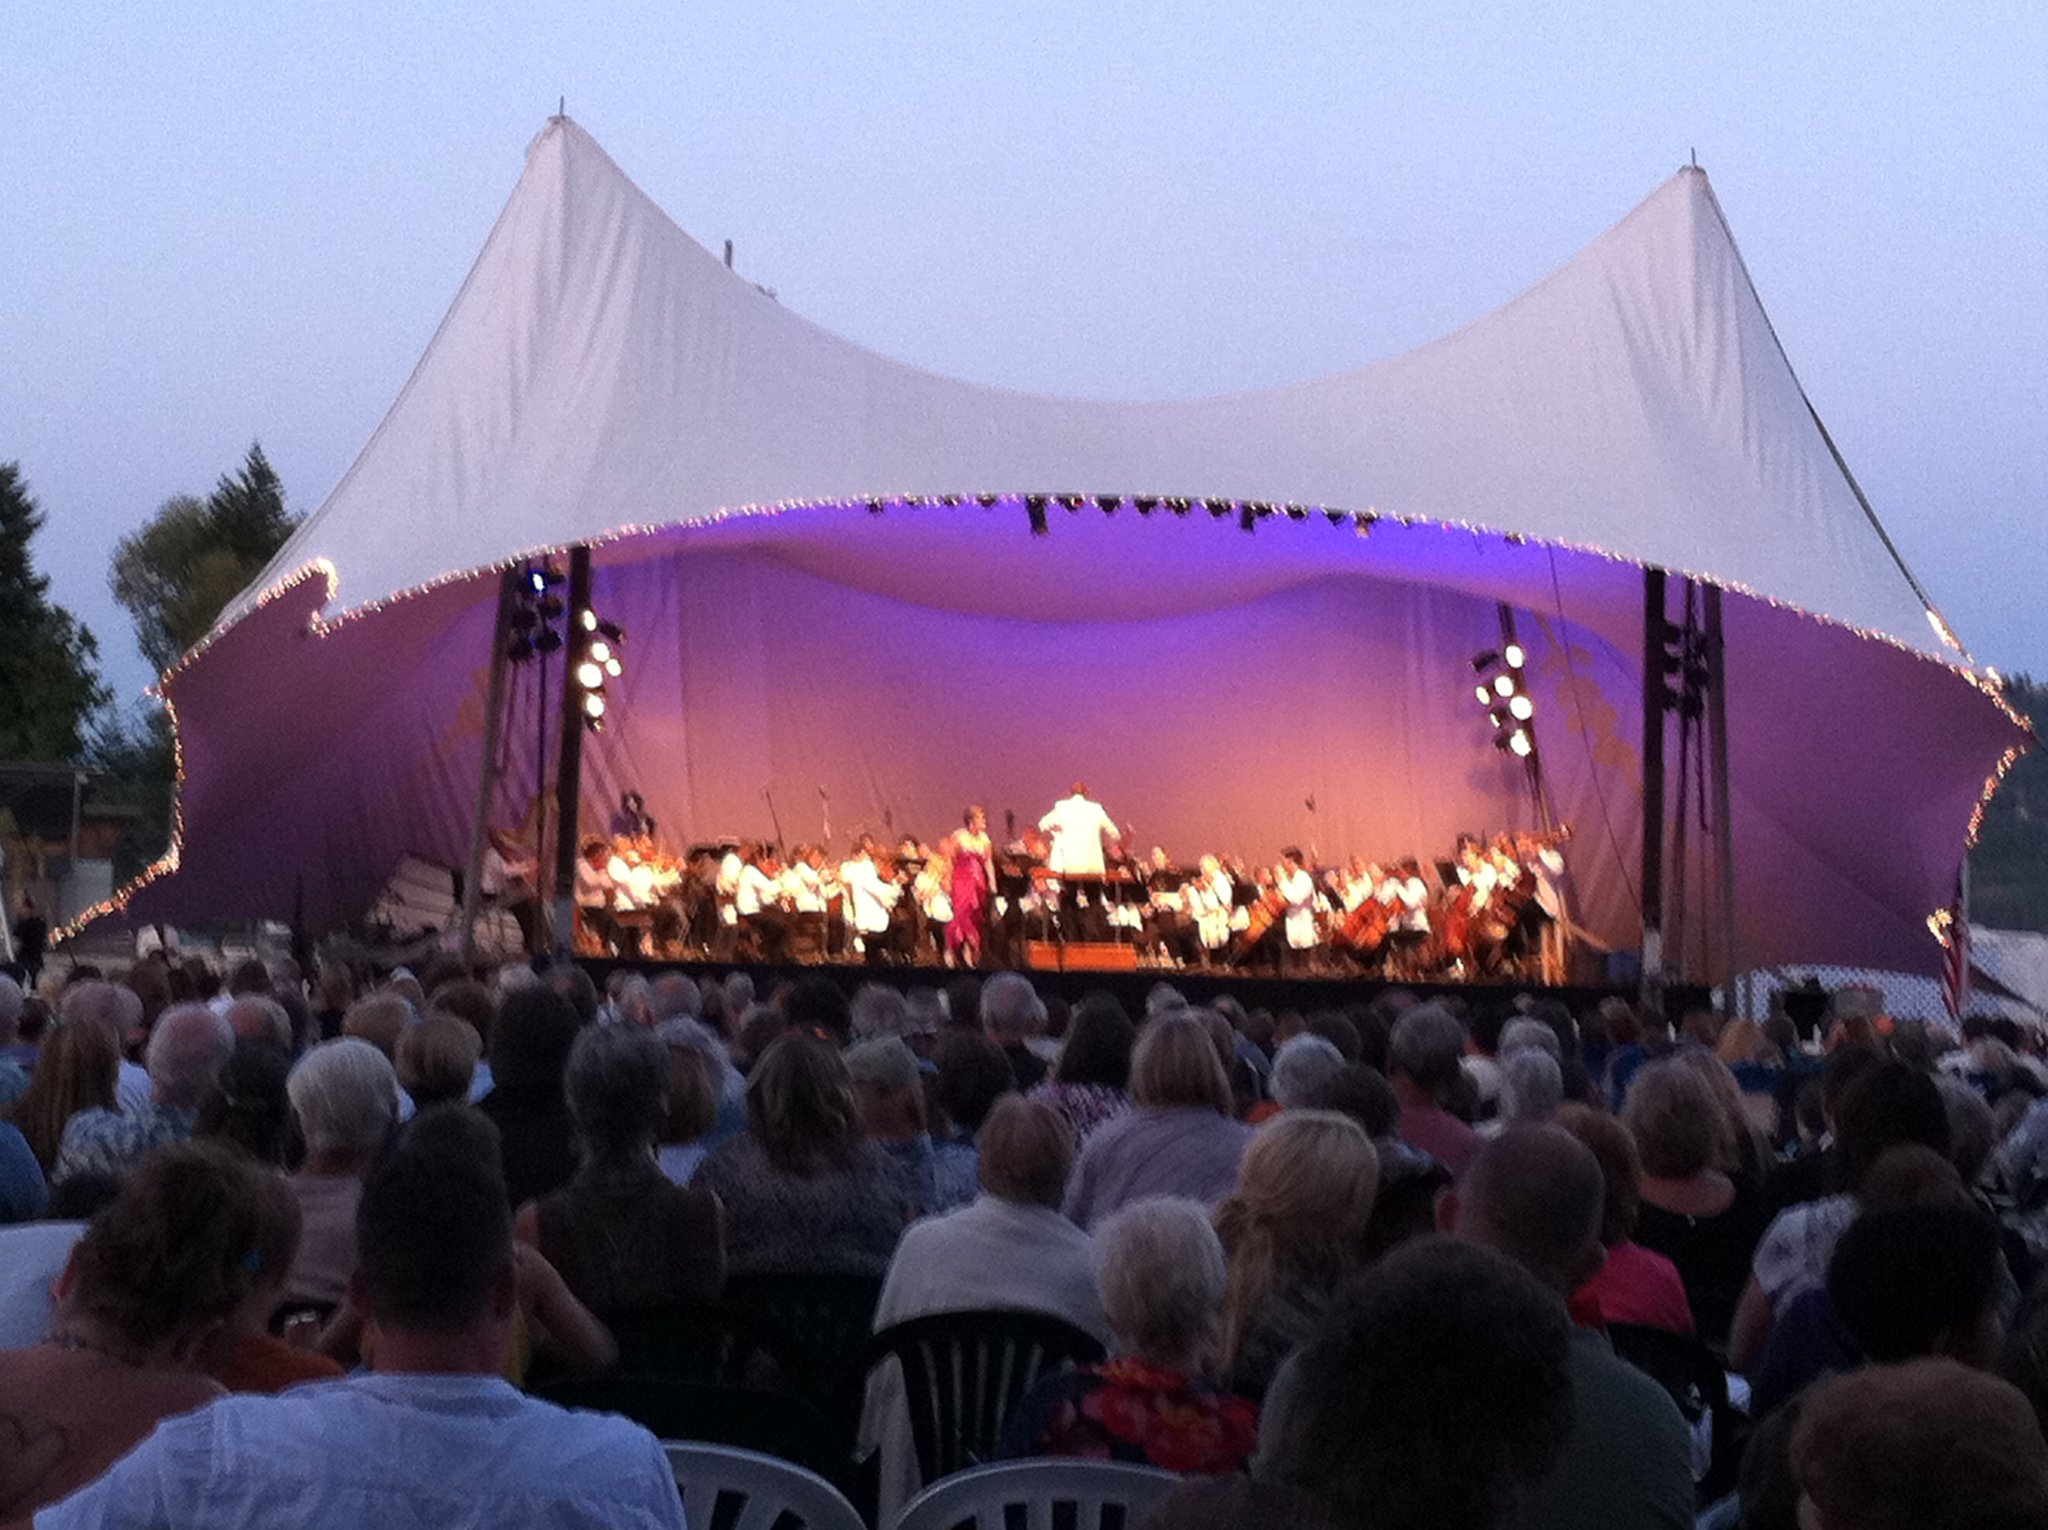  Arias with the Spokane Symphony at the Festival at Sandpoint, August 2011 